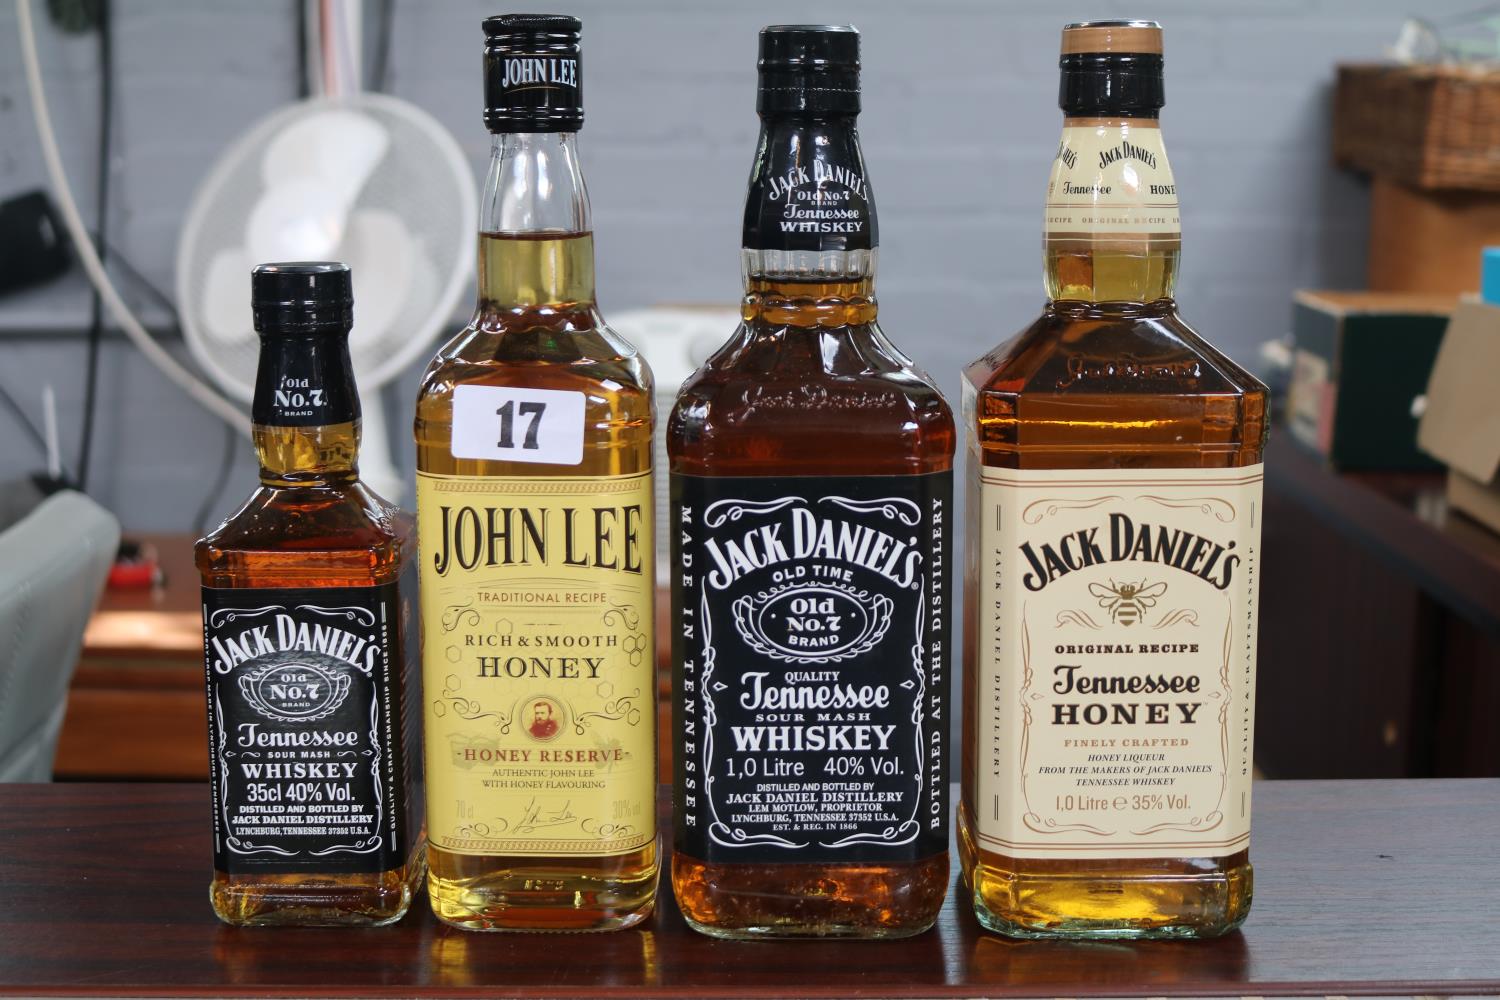 Collection of 4 American Whiskies to include Jack Daniels Old No.7 Brand & Jack Daniels Tennessee